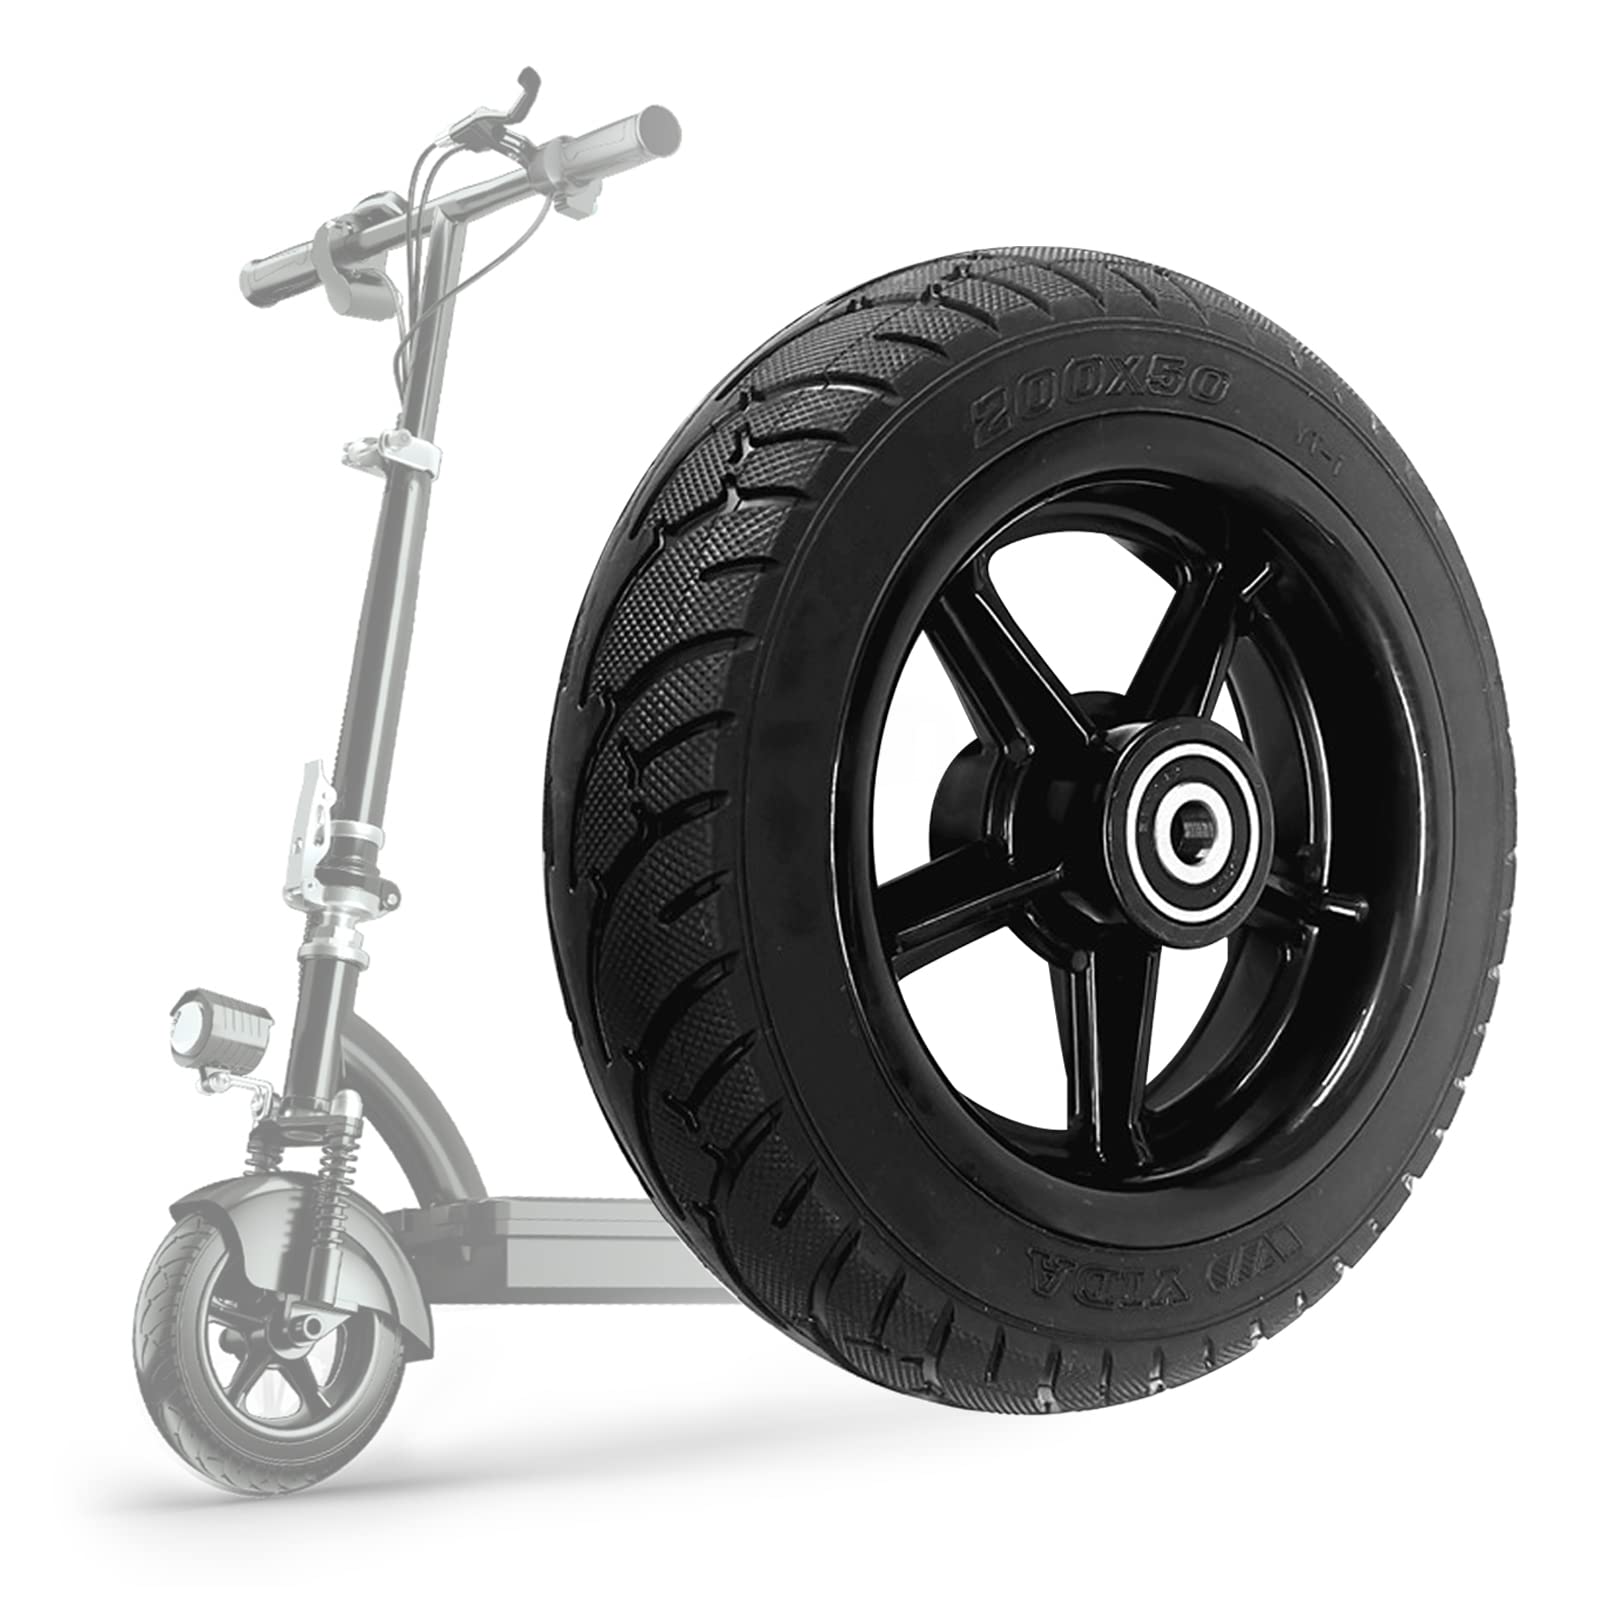 Electric Scooter Rubber Tyre - 8 Inch Solid Replacement Wheels - Durable Anti-Slip Tyre for all 8 inch electric scooter - 200 x 50 cm Highly Elastic Electric Scooter Tyres von LIROPAU